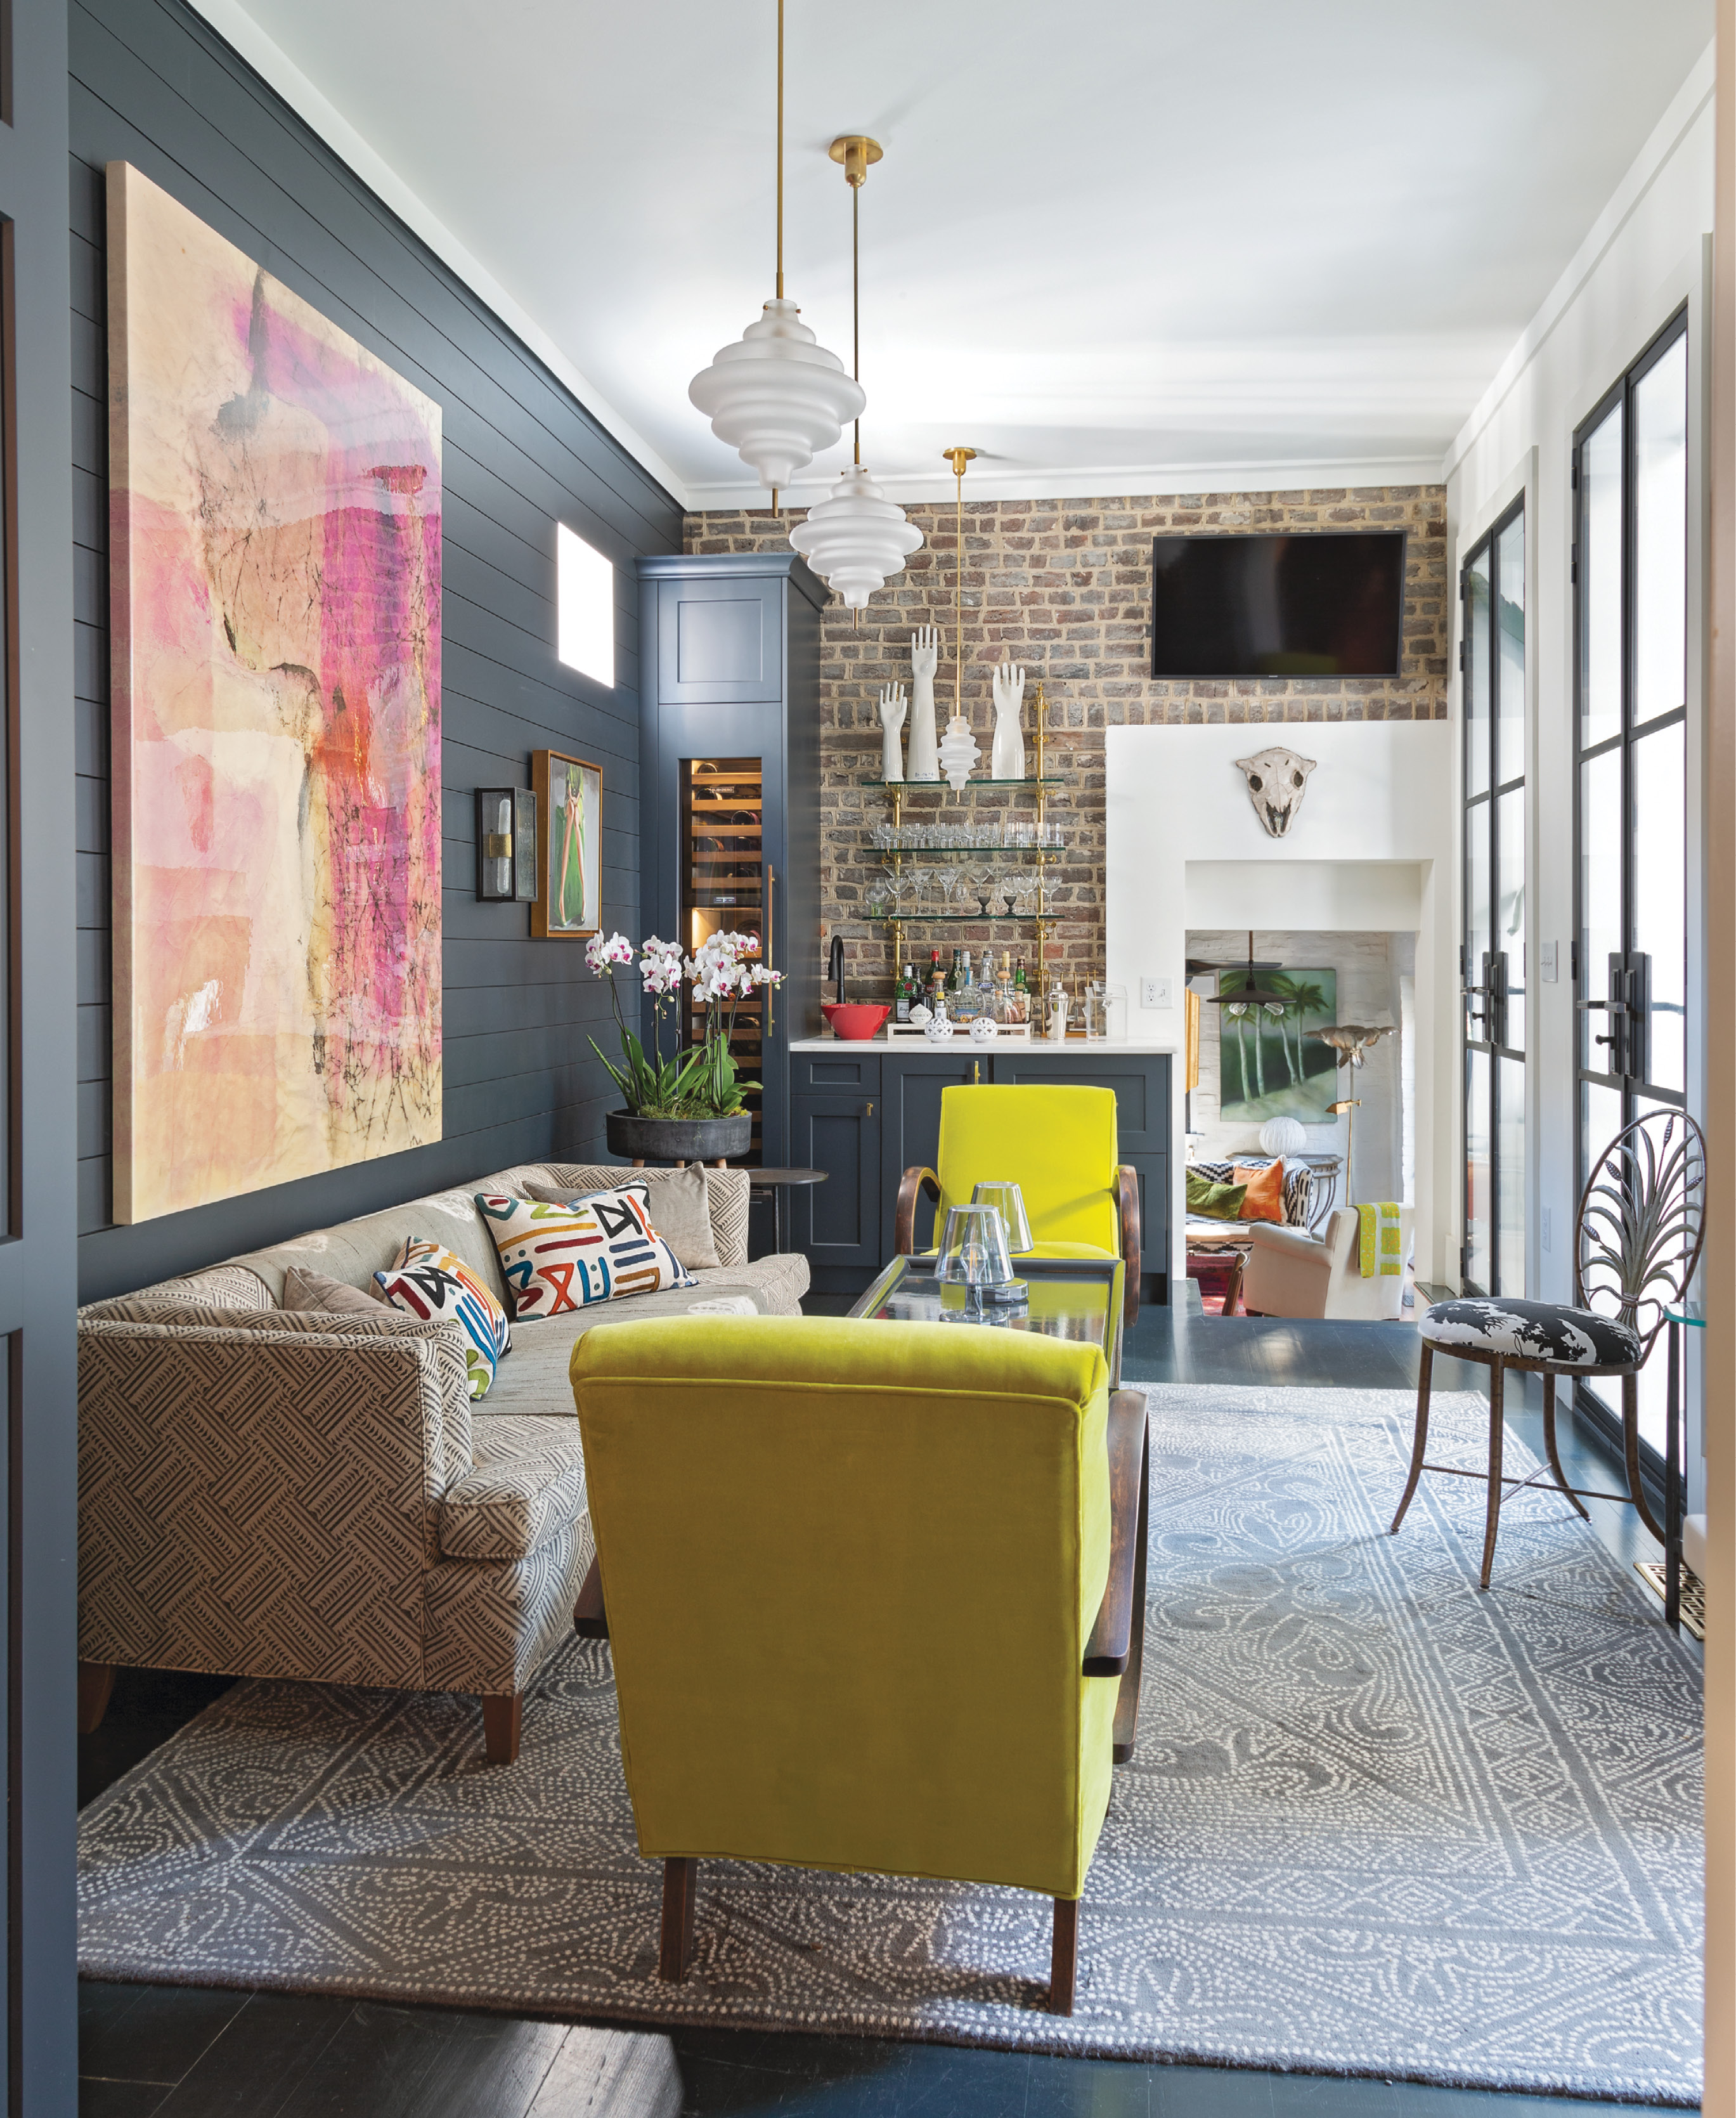 Trading Spaces: Formerly a slim galley kitchen, this “hyphen” connecting the Ansonborough single house to its guest suite was transformed into a chic lounge space, complete with wet bar.